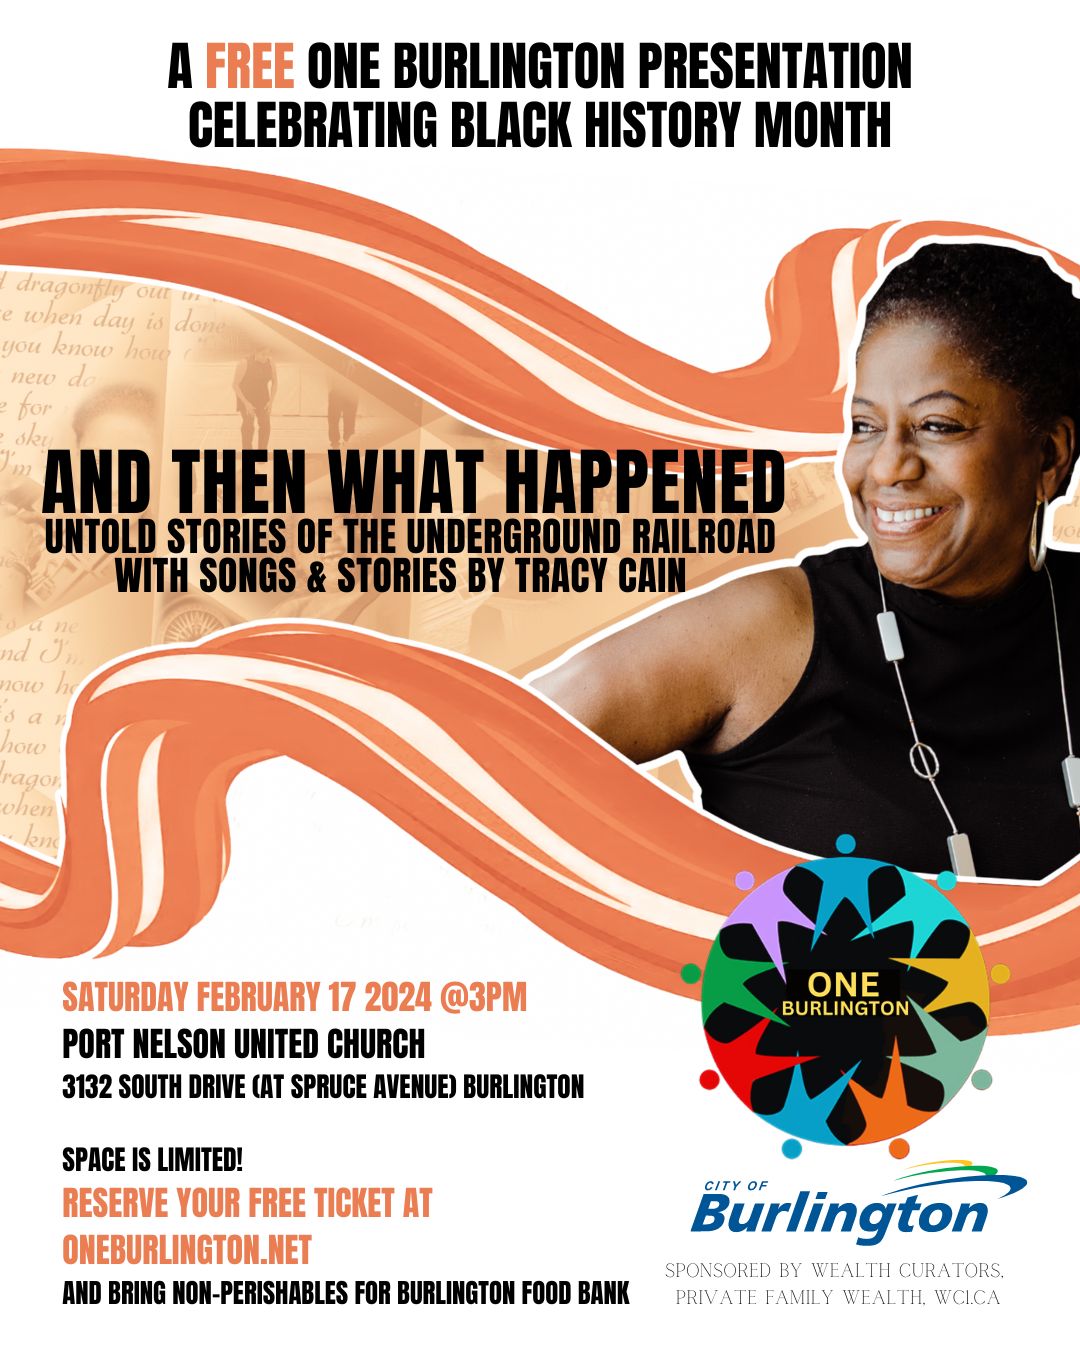 FREE Black History Event AND THEN WHAT HAPPENED with Tracy Cain Feb 17 2024